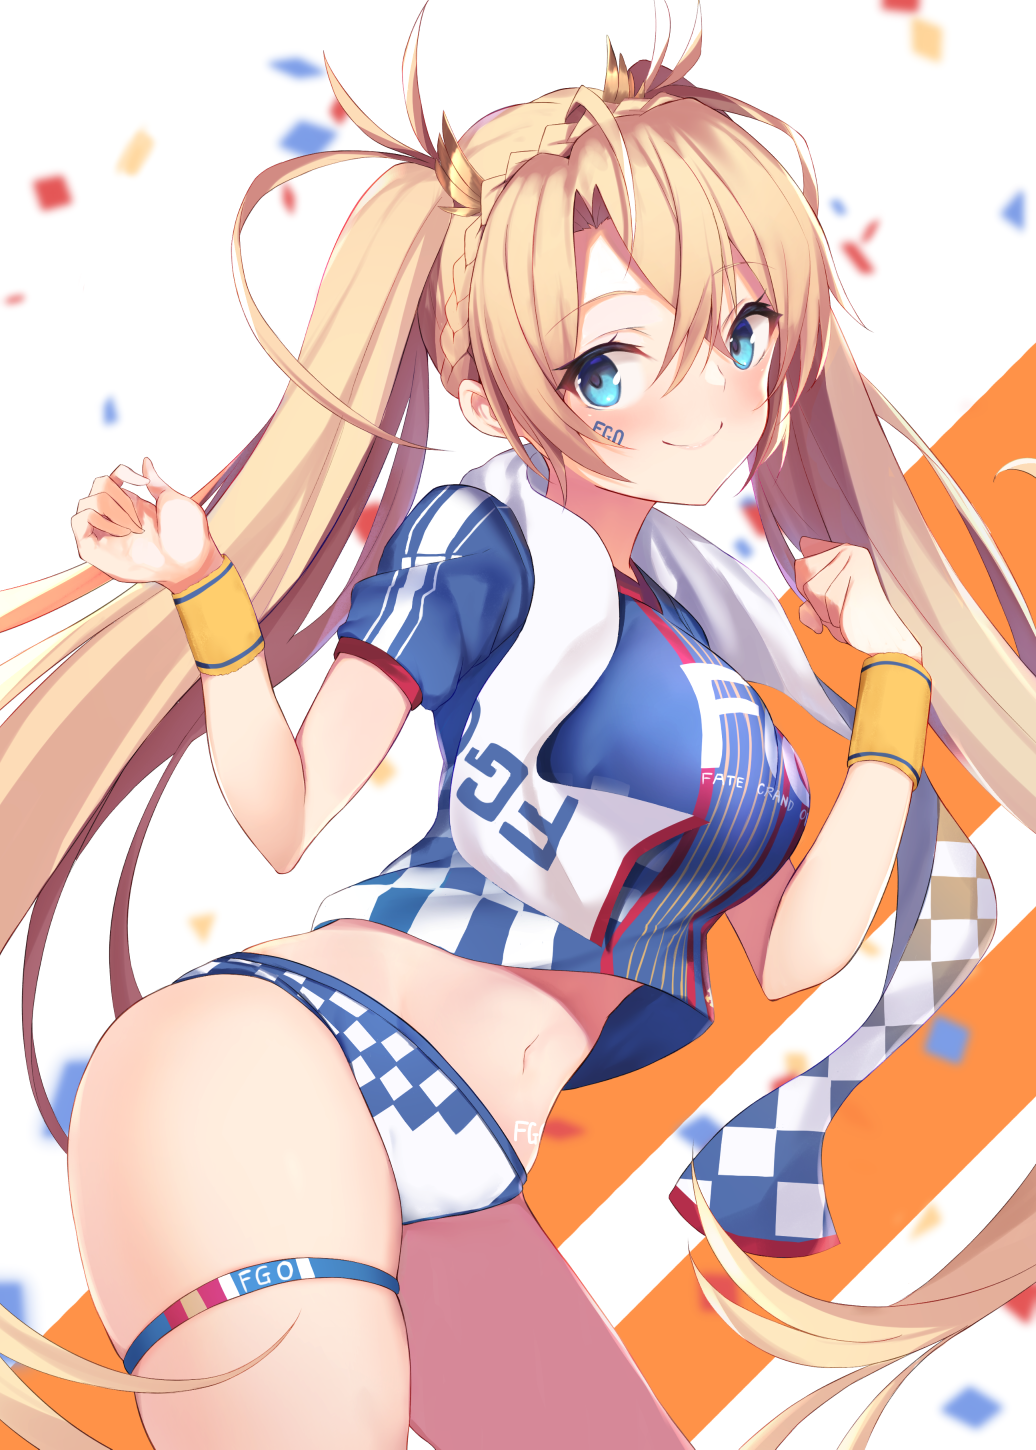 1girl bangs blonde_hair blue_eyes bradamante_(fate/grand_order) braid closed_mouth commentary_request eyebrows_visible_through_hair fate/grand_order fate_(series) hair_ornament heroic_spirit_festival_outfit highres leg_garter long_hair looking_at_viewer maosame midriff navel shirt smile solo striped striped_shirt towel towel_around_neck twintails vertical-striped_shirt vertical_stripes